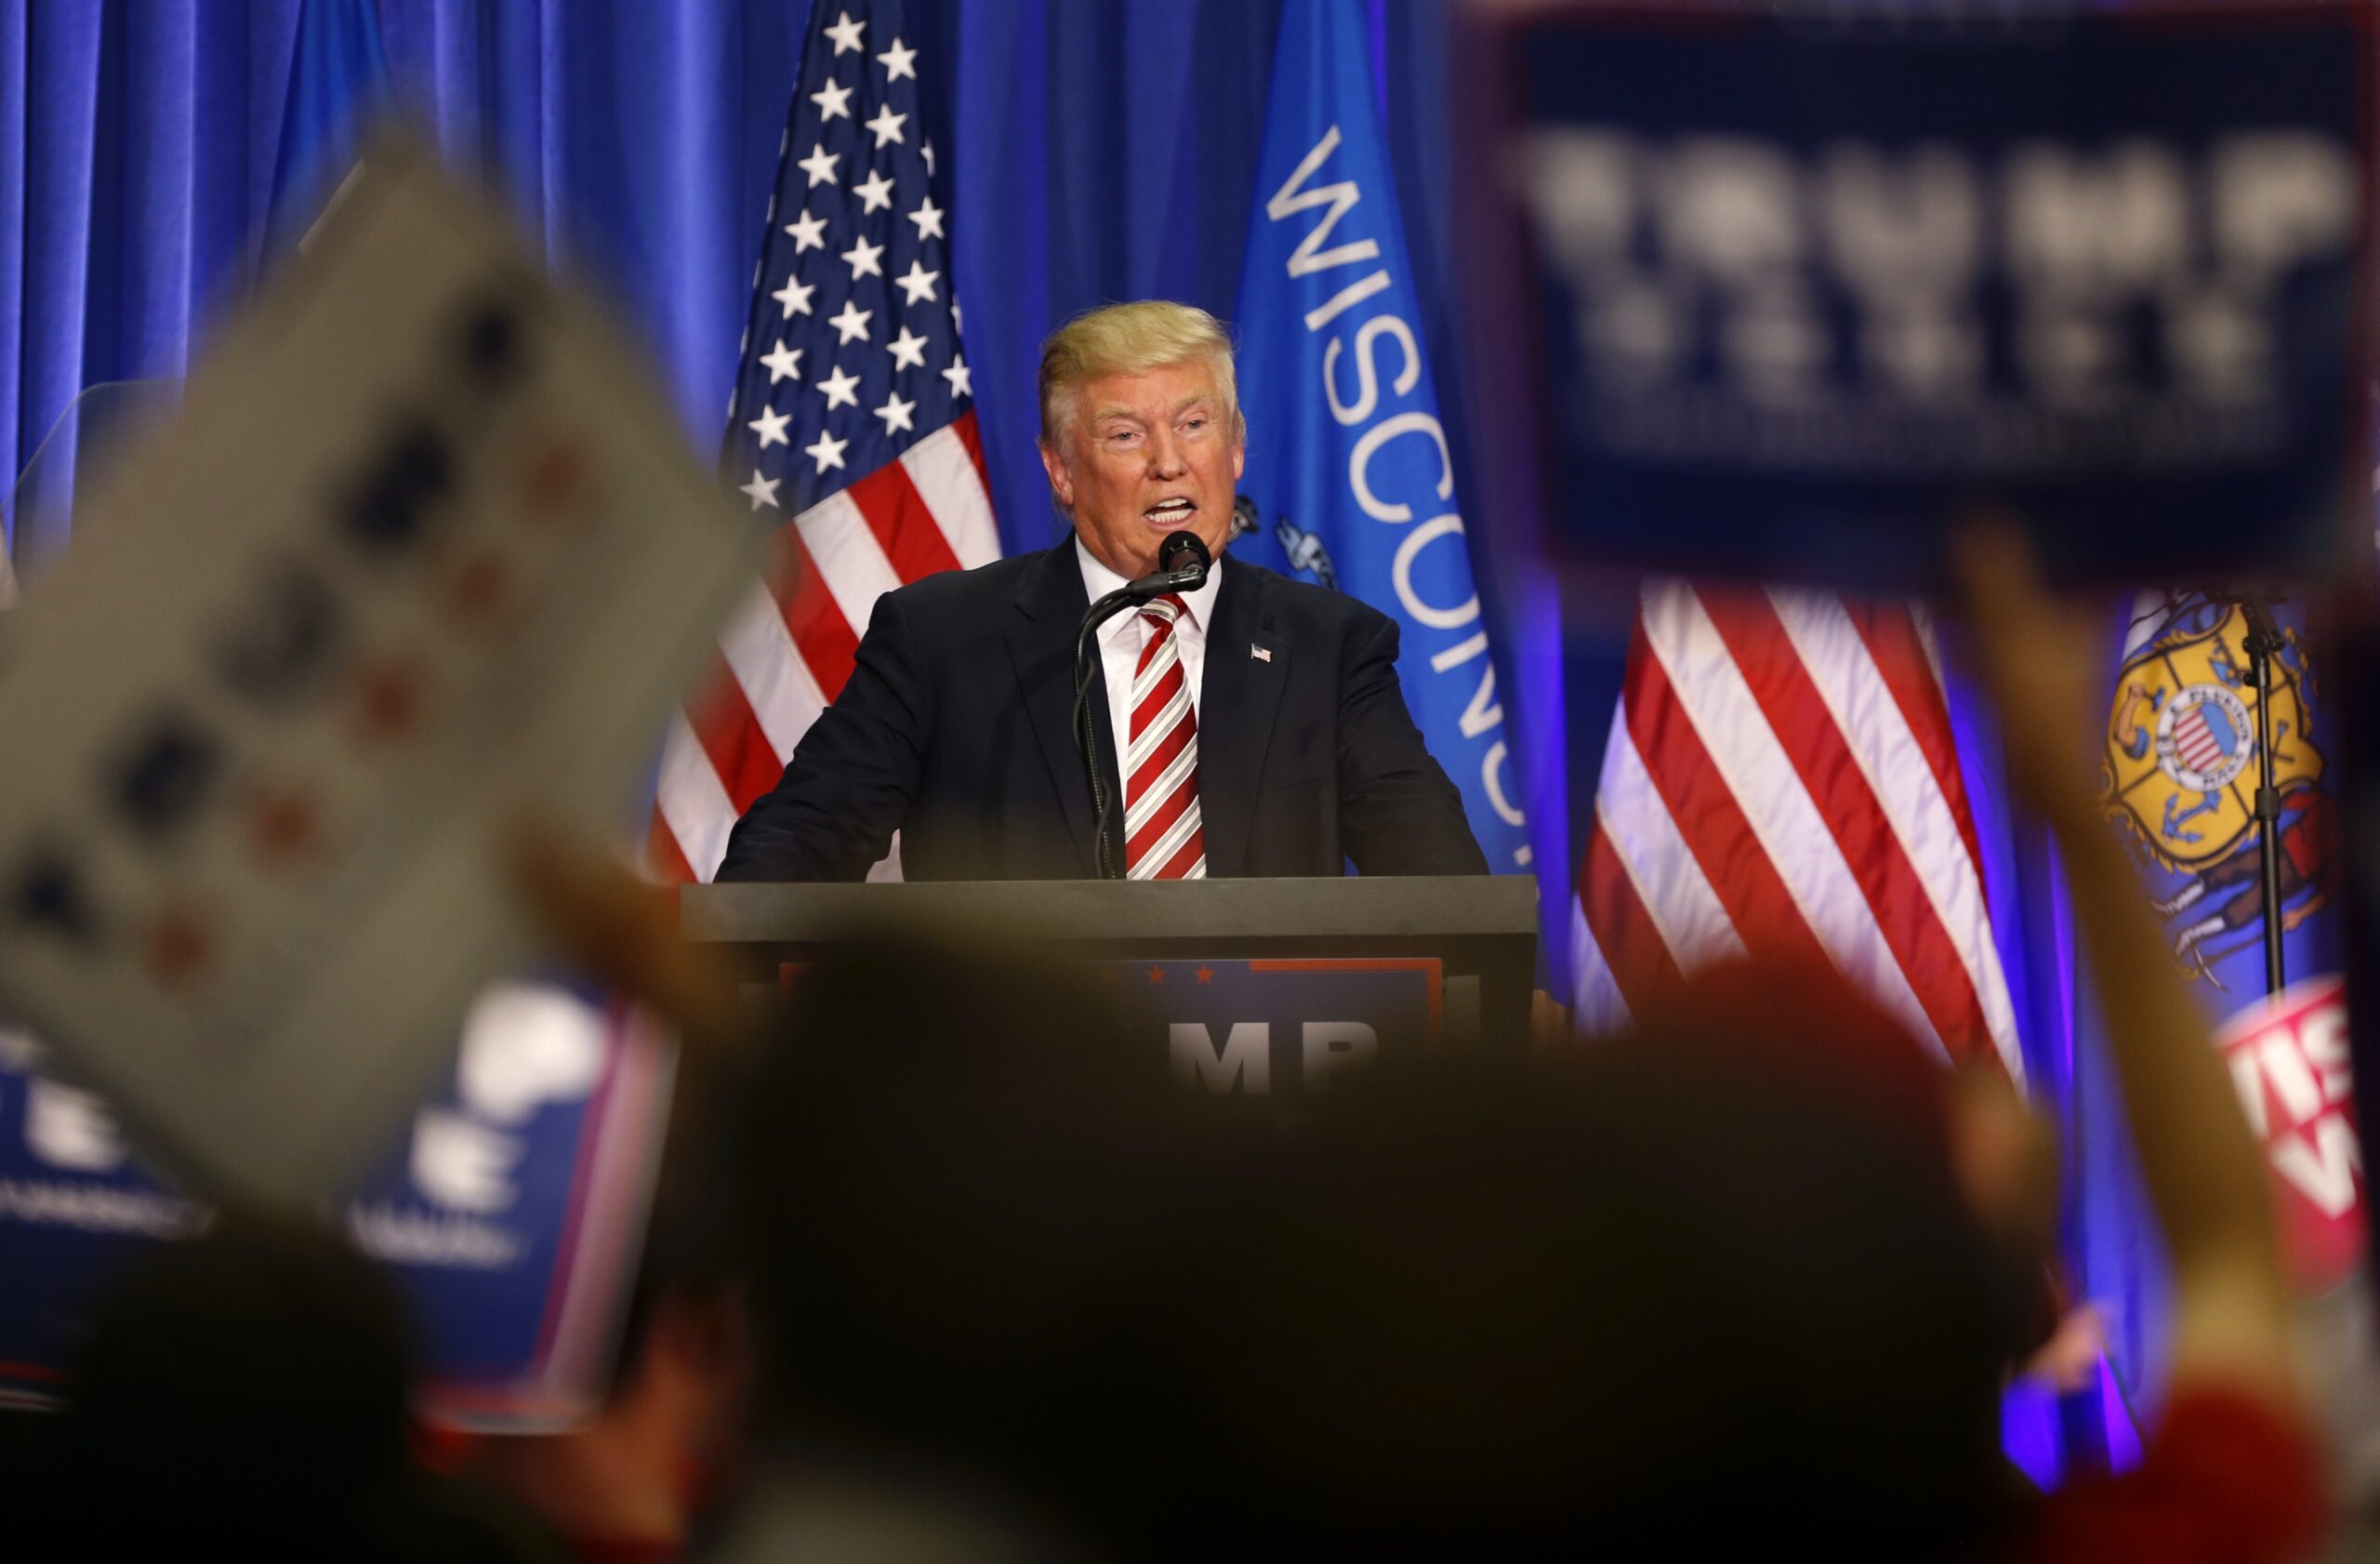 Trump Coming To Waukesha In Search Of More GOP Voters